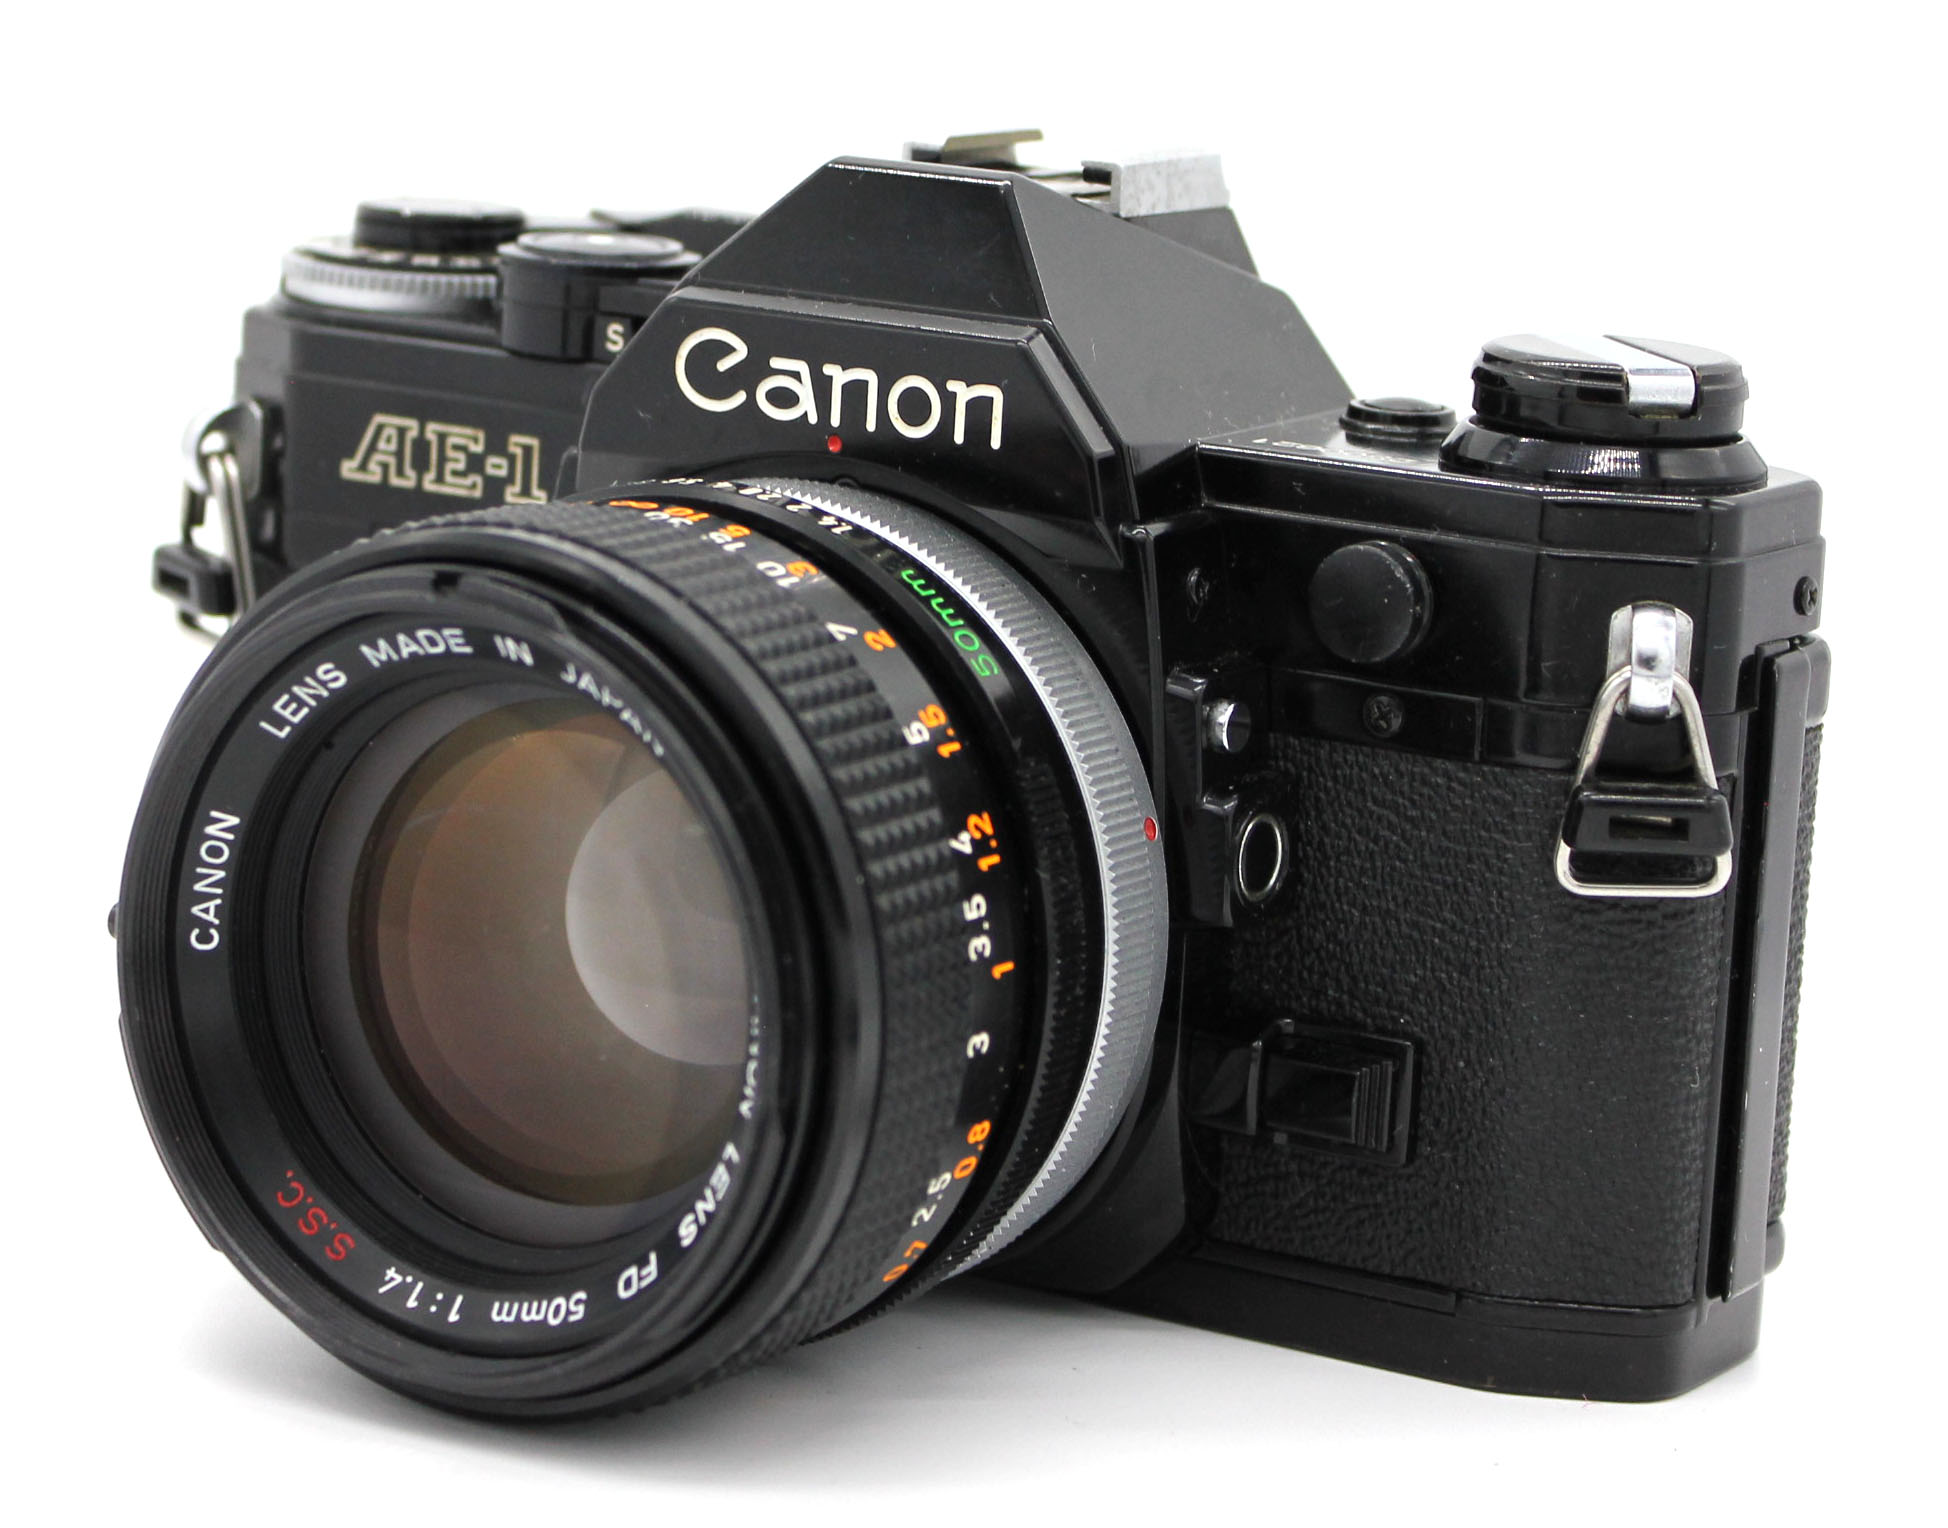 Japan Used Camera Shop | [Excellent+++] Canon AE-1 35mm SLR Camera Black with FD 50mm F/1.4 S.S.C. Lens from Japan